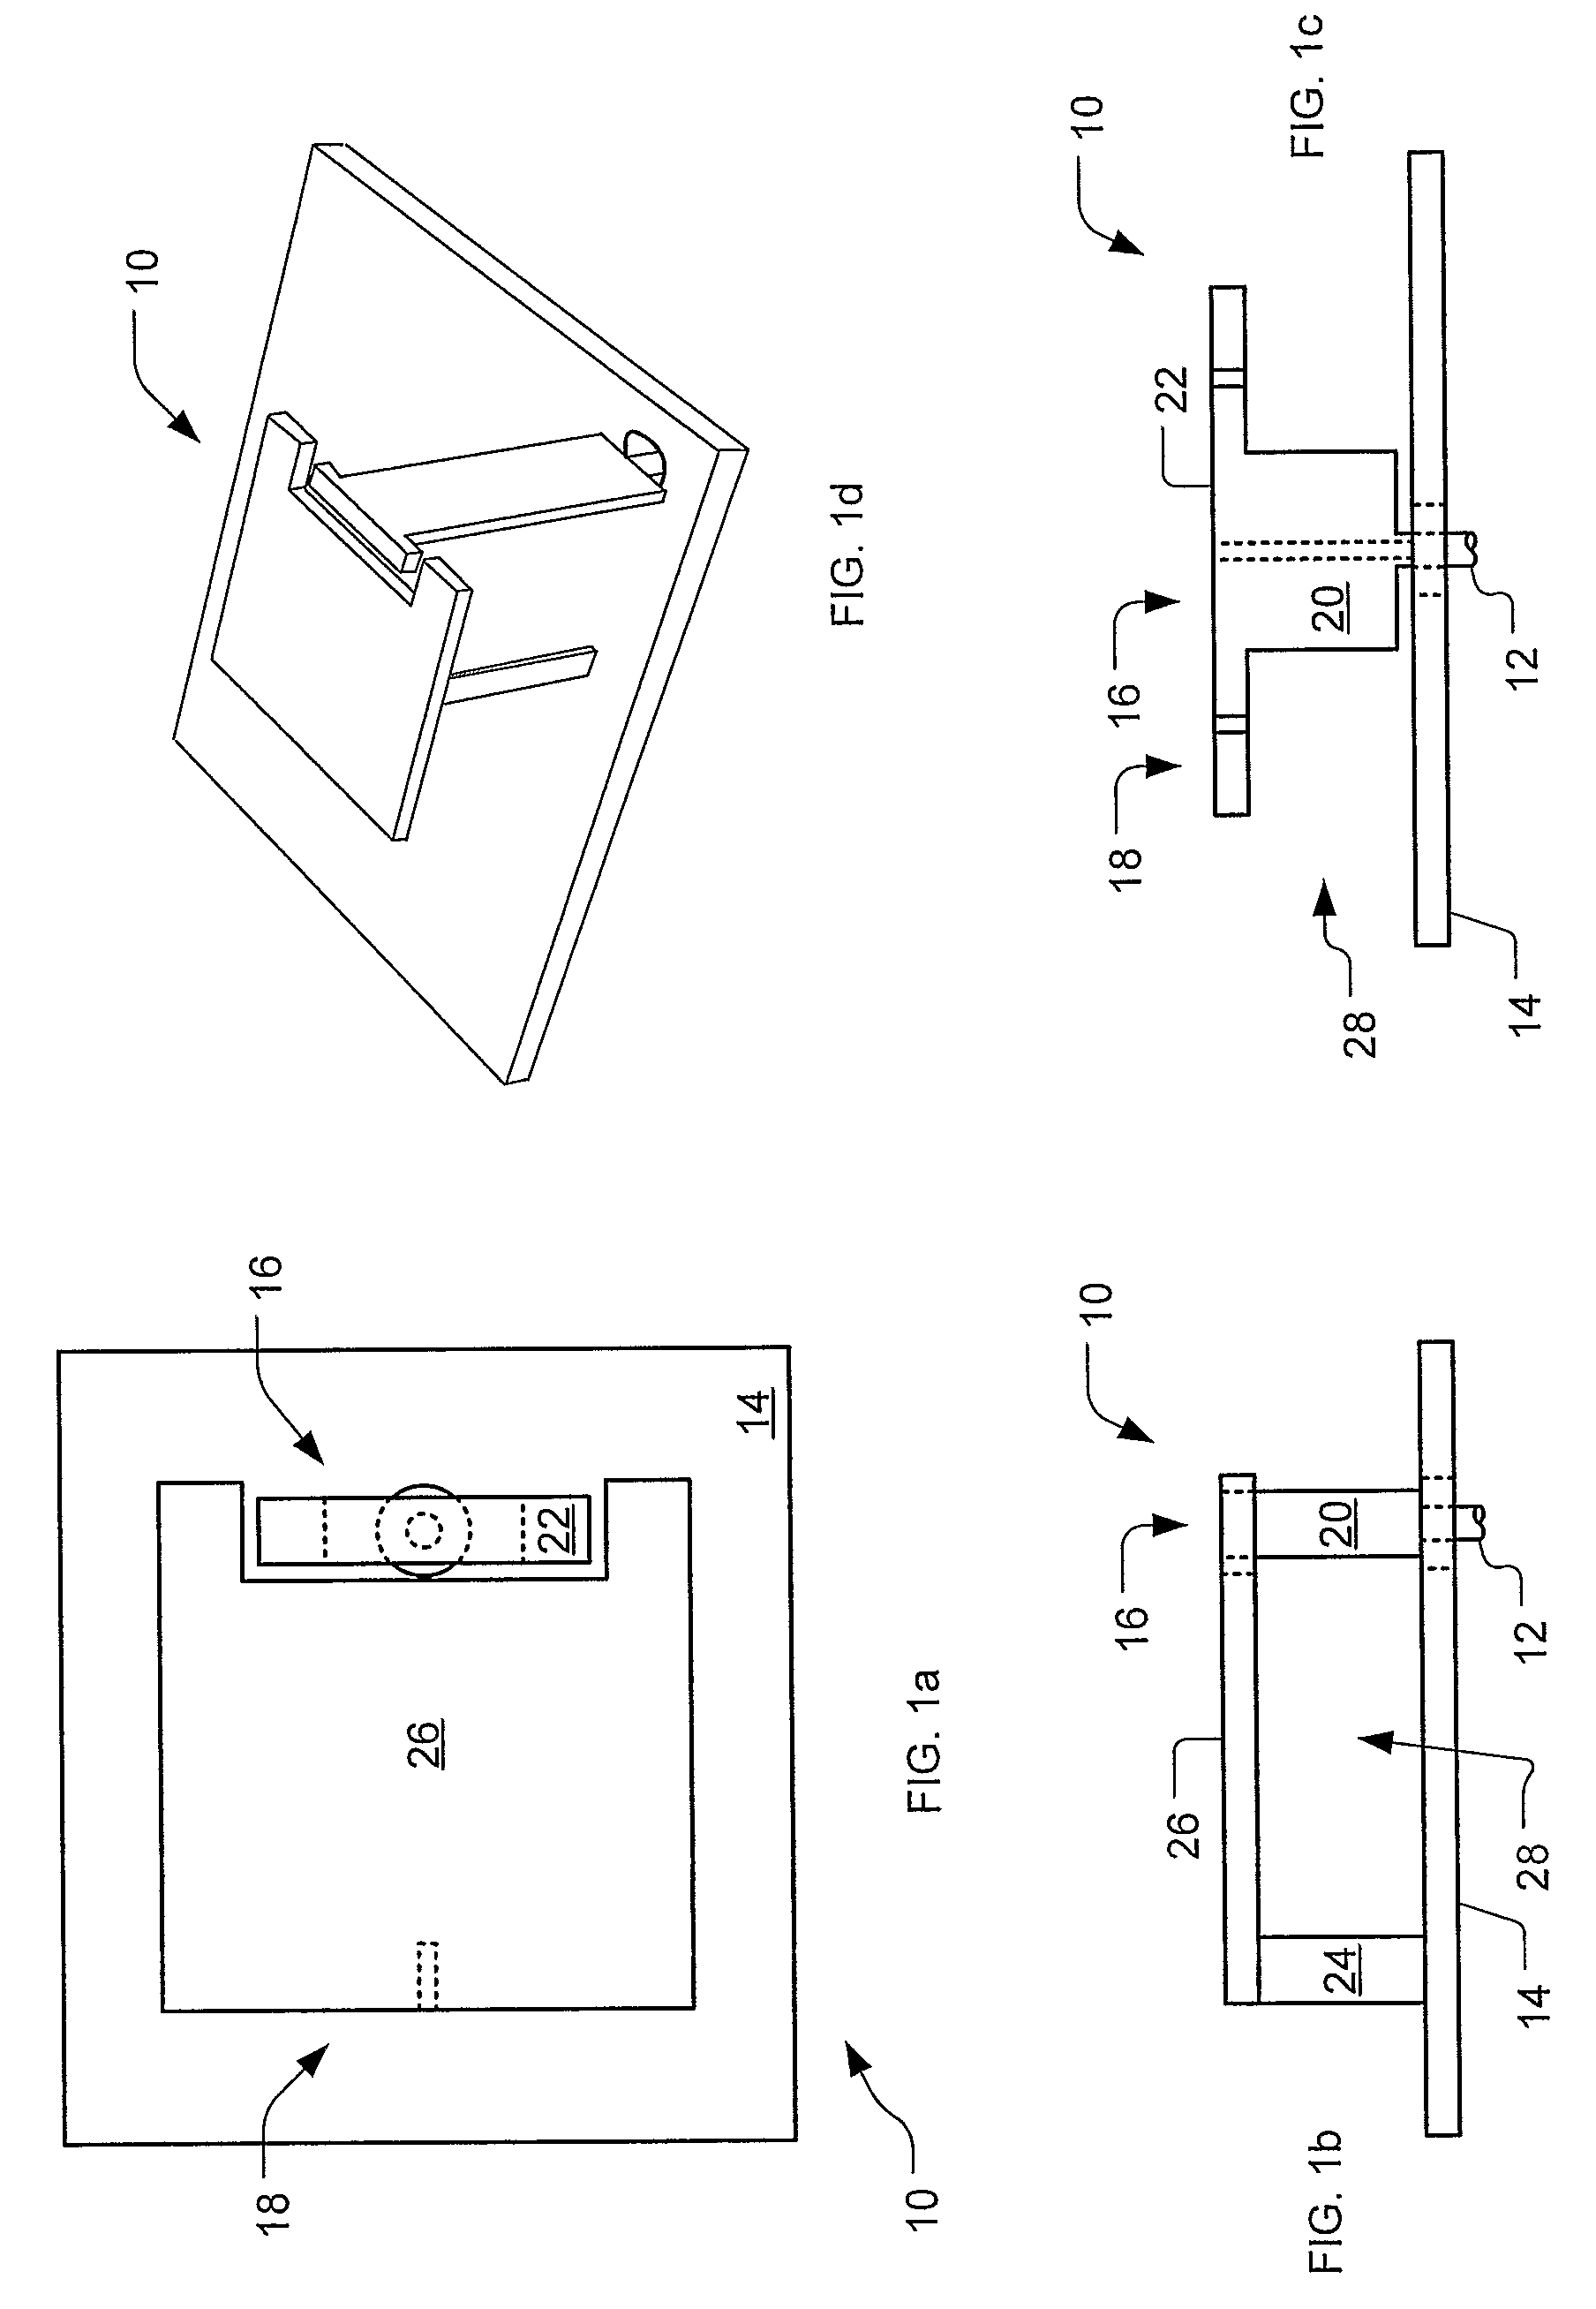 Multi-band or wide-band antenna including driven and parasitic top-loading elements